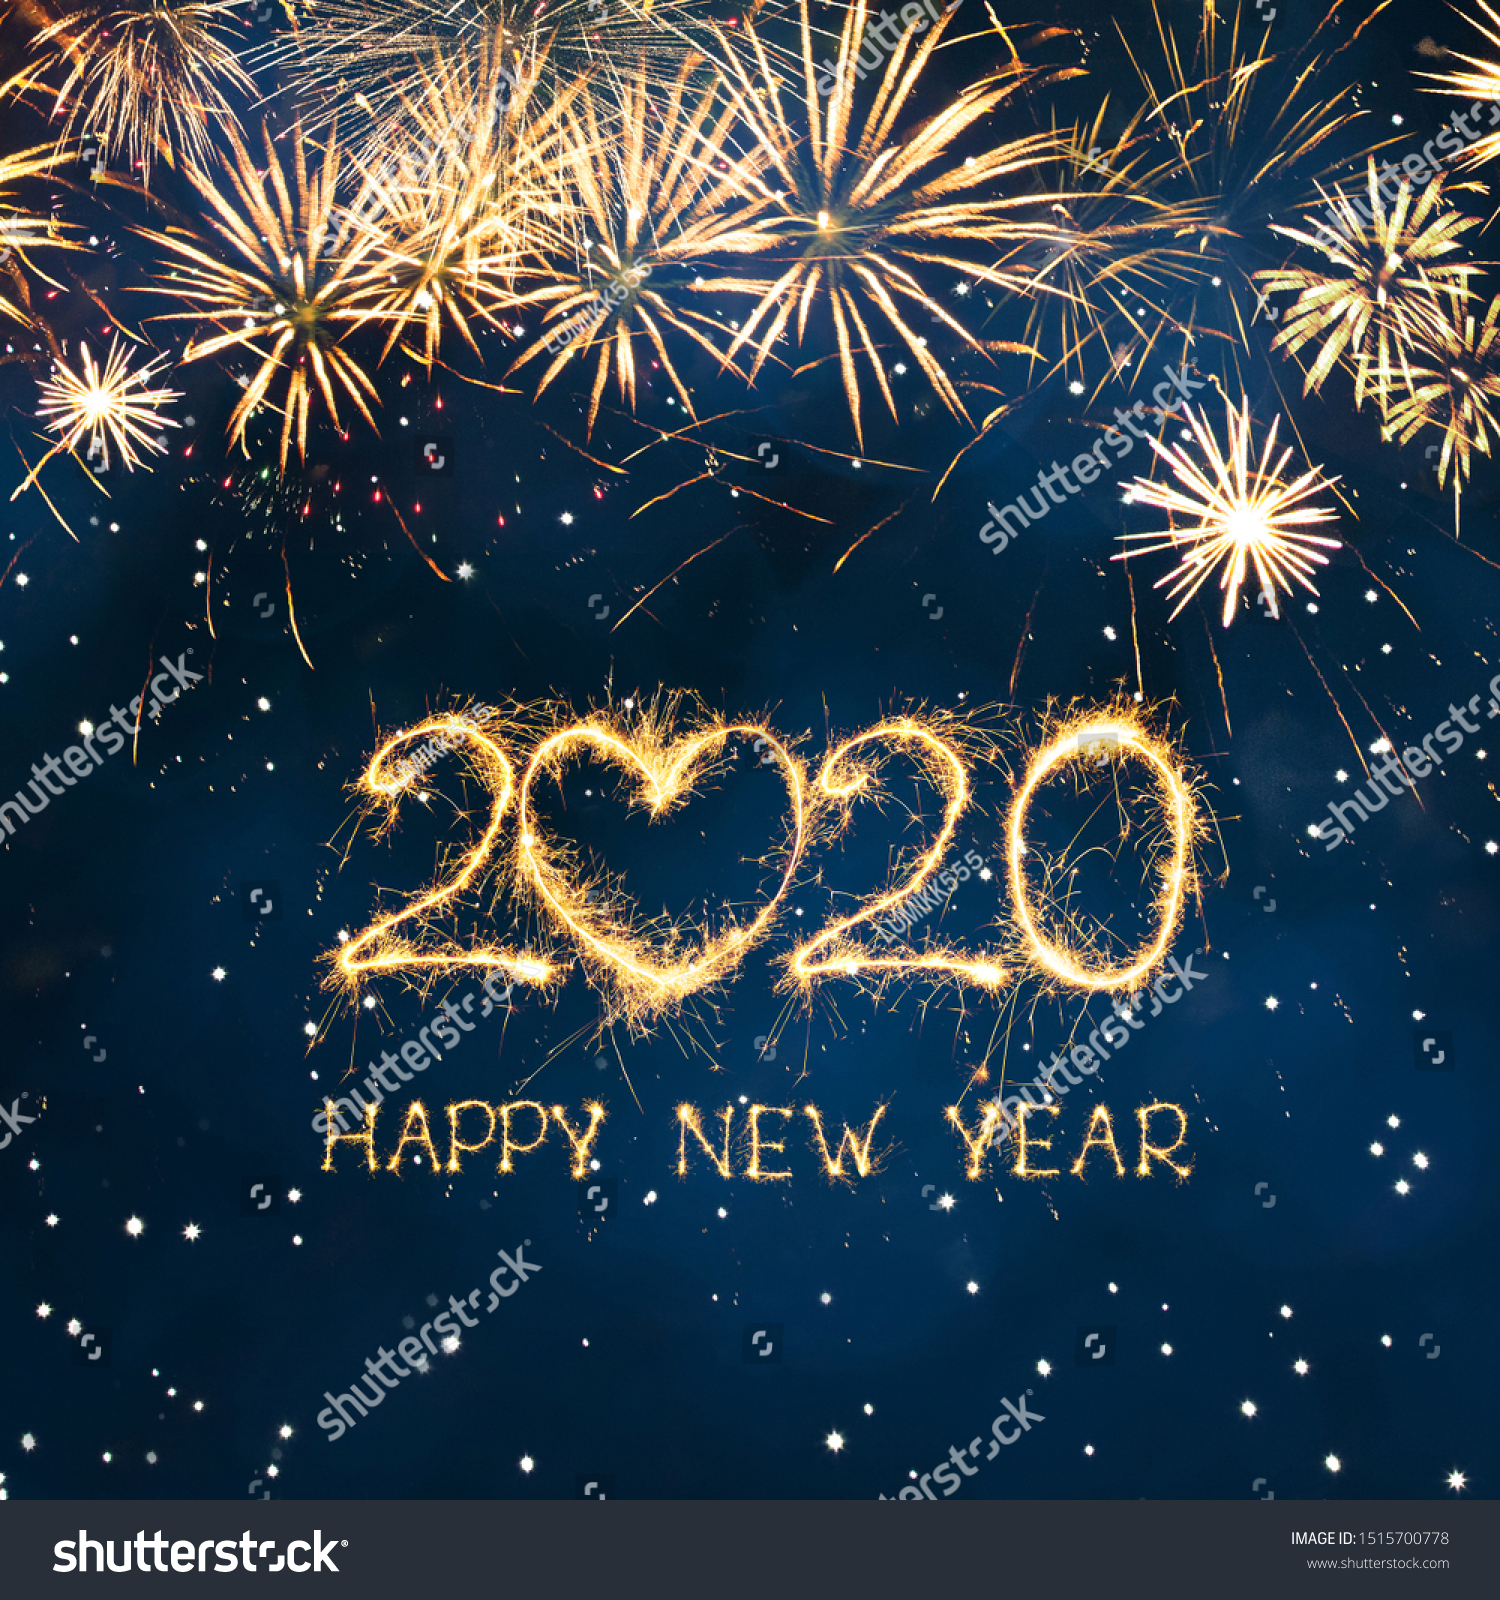 Greeting Card Happy New Year 2020 Stock Photo Edit Now 1515700778